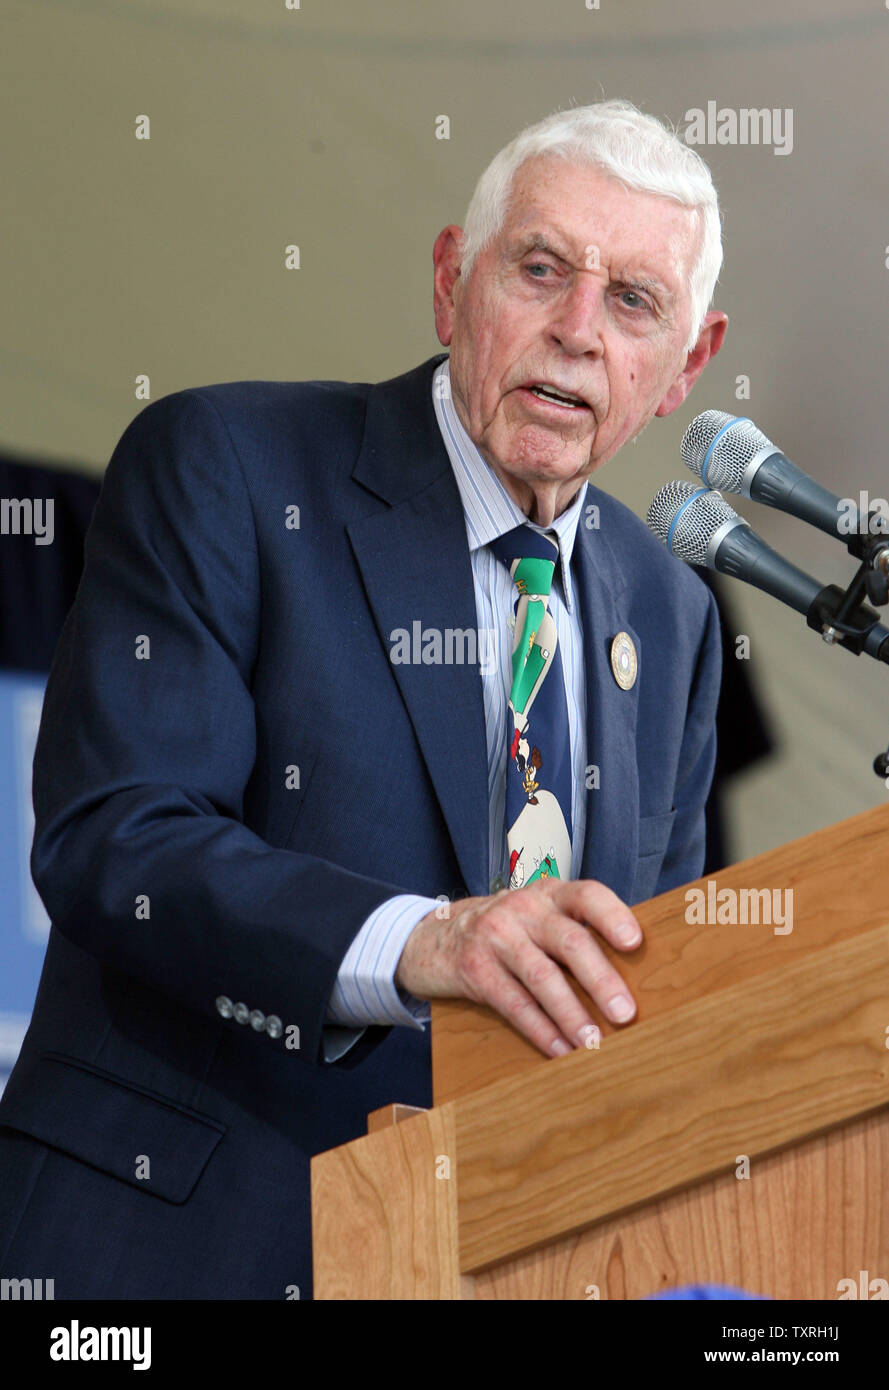 Longtime voice of the Houston Astros Gene Elston delivers his acceptance speech after receiving the Ford C. Frick Award at induction ceremonies for the National Baseball Hall of Fame in Cooperstown, NY on July 30, 2006.  (UPI Photo/Bill Greenblatt) Stock Photo